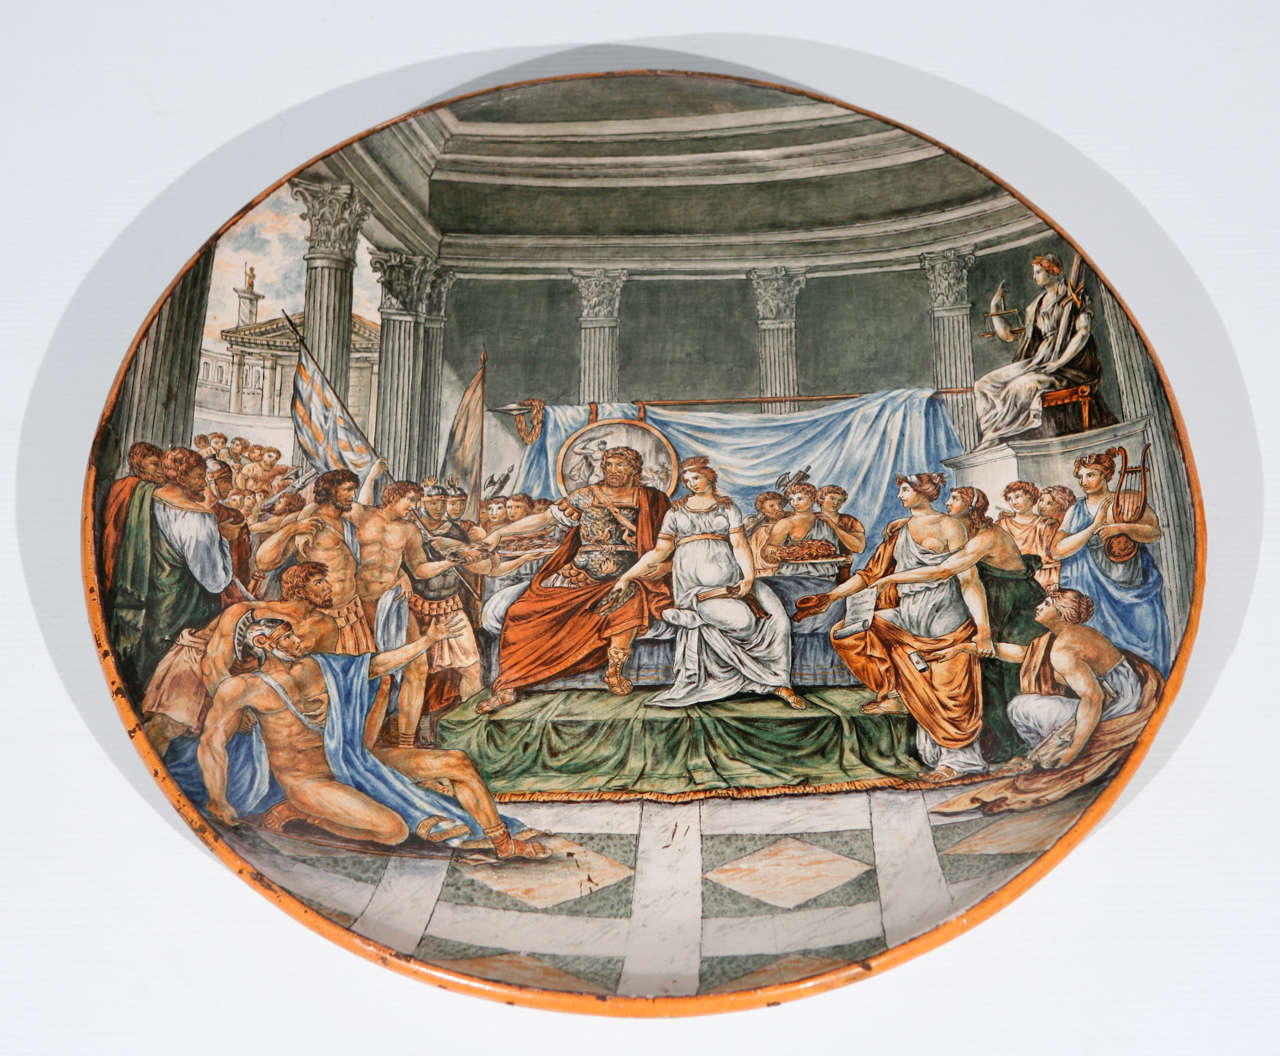 A stunning large Majolica charger depicting a Roman emperor and his court.
Laurel leaves being awarded to victors in Rome were symbols of martial victory, crowning a successful commander during his triumph.